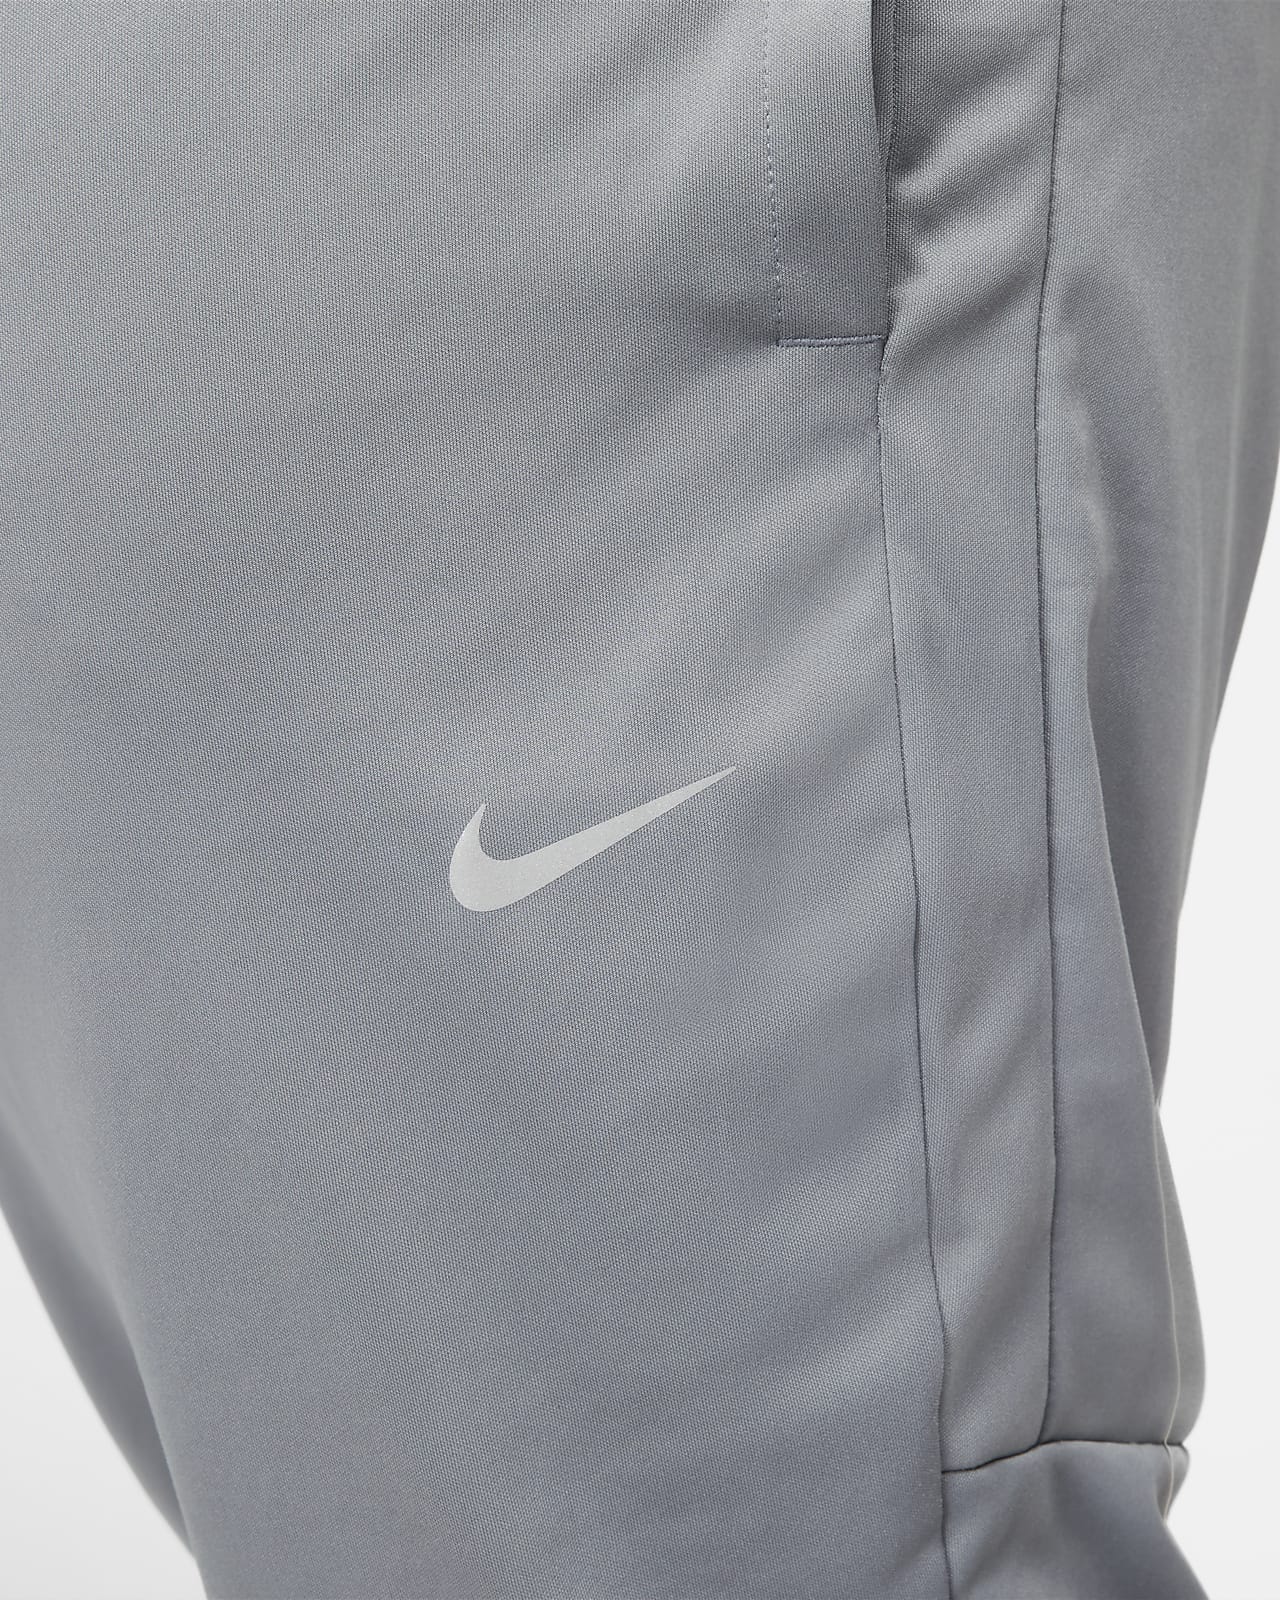 Nike Challenger Men's Dri-FIT Running Tights. Nike AT